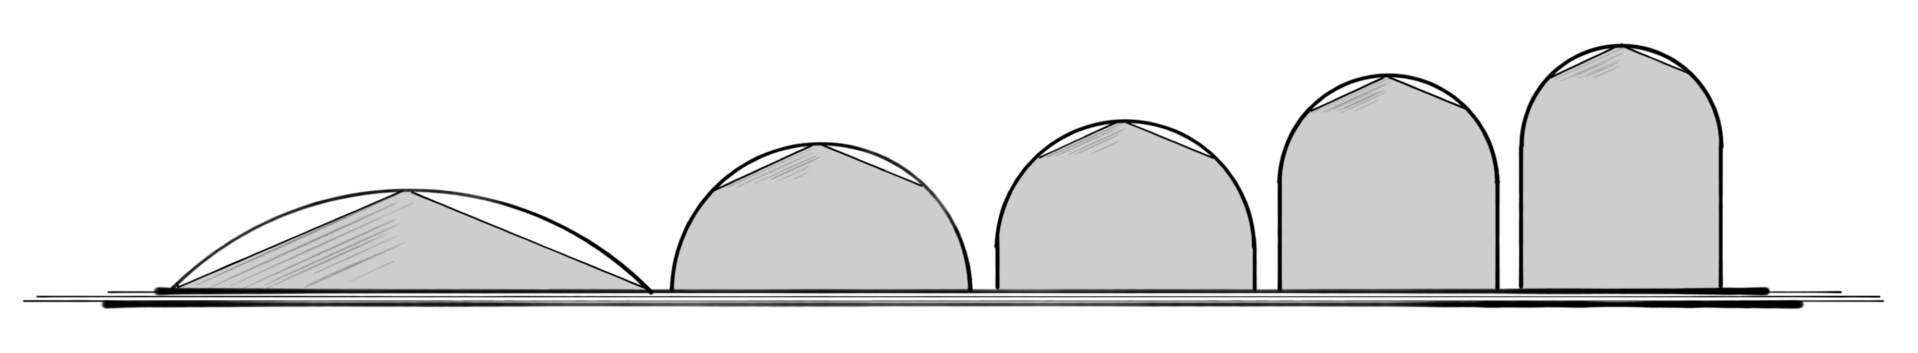 Five storage dome shapes used as templates for the sizer.